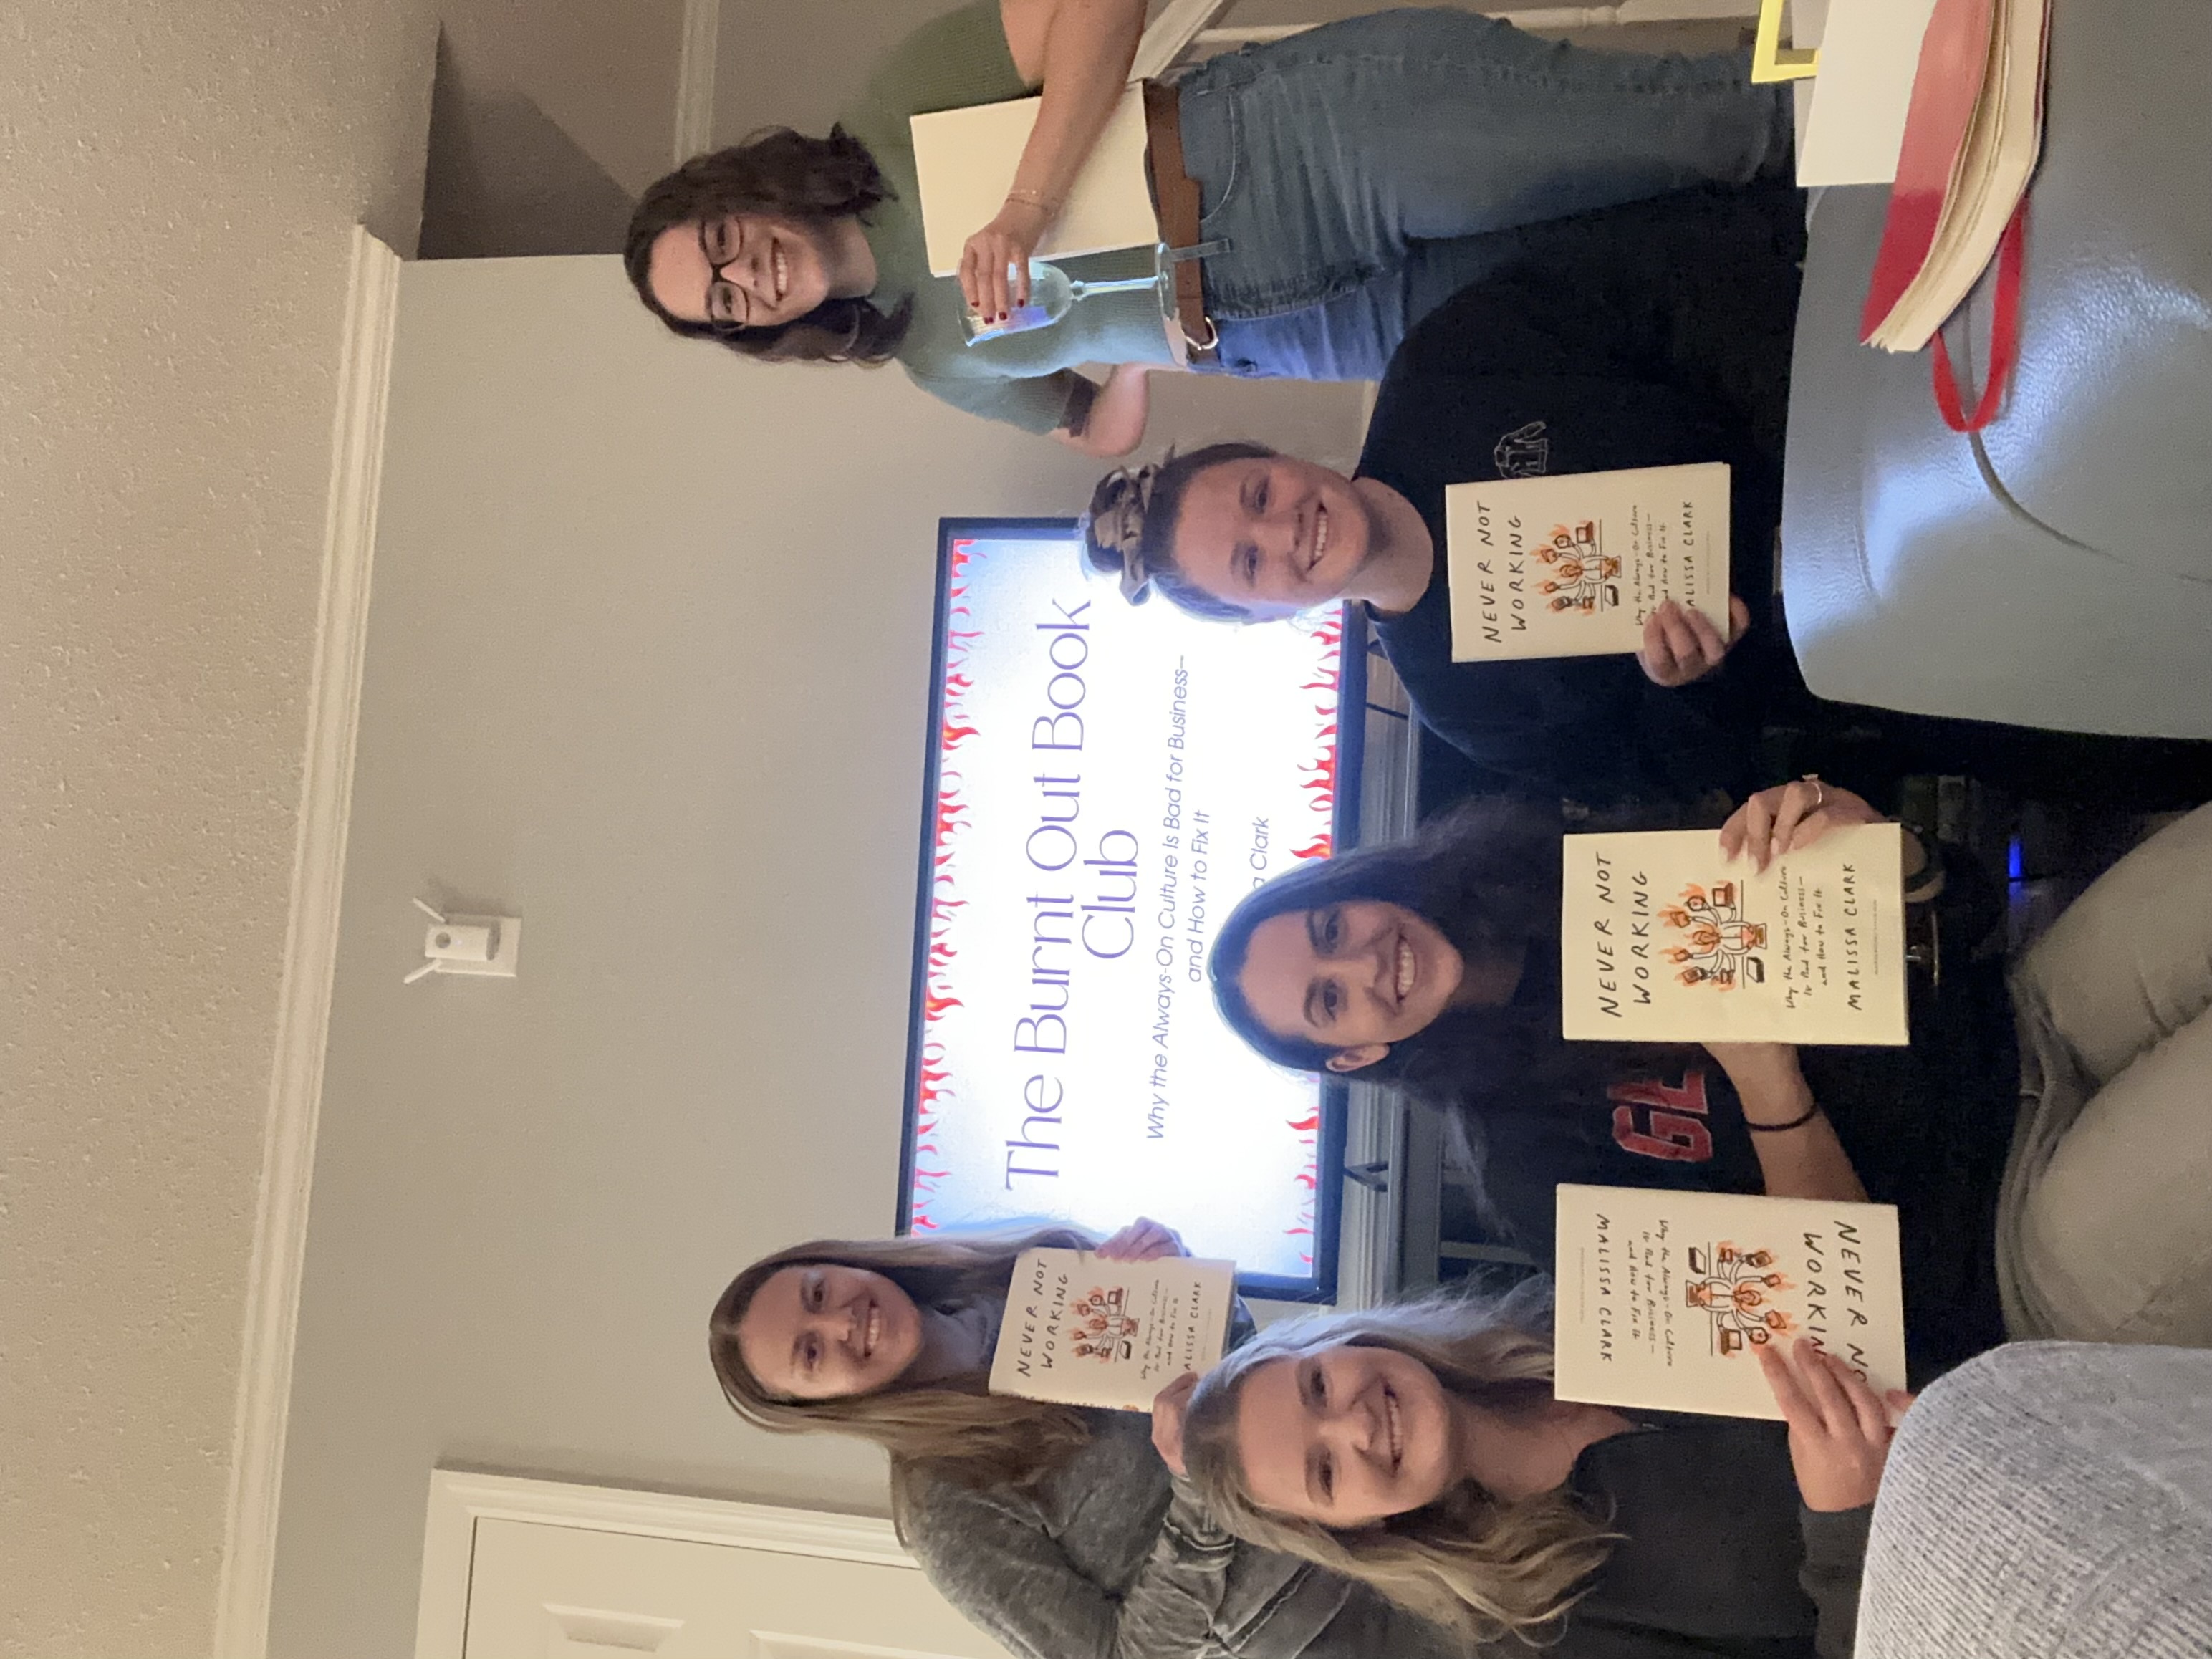 I-O Group at the Burnt Out Book Club